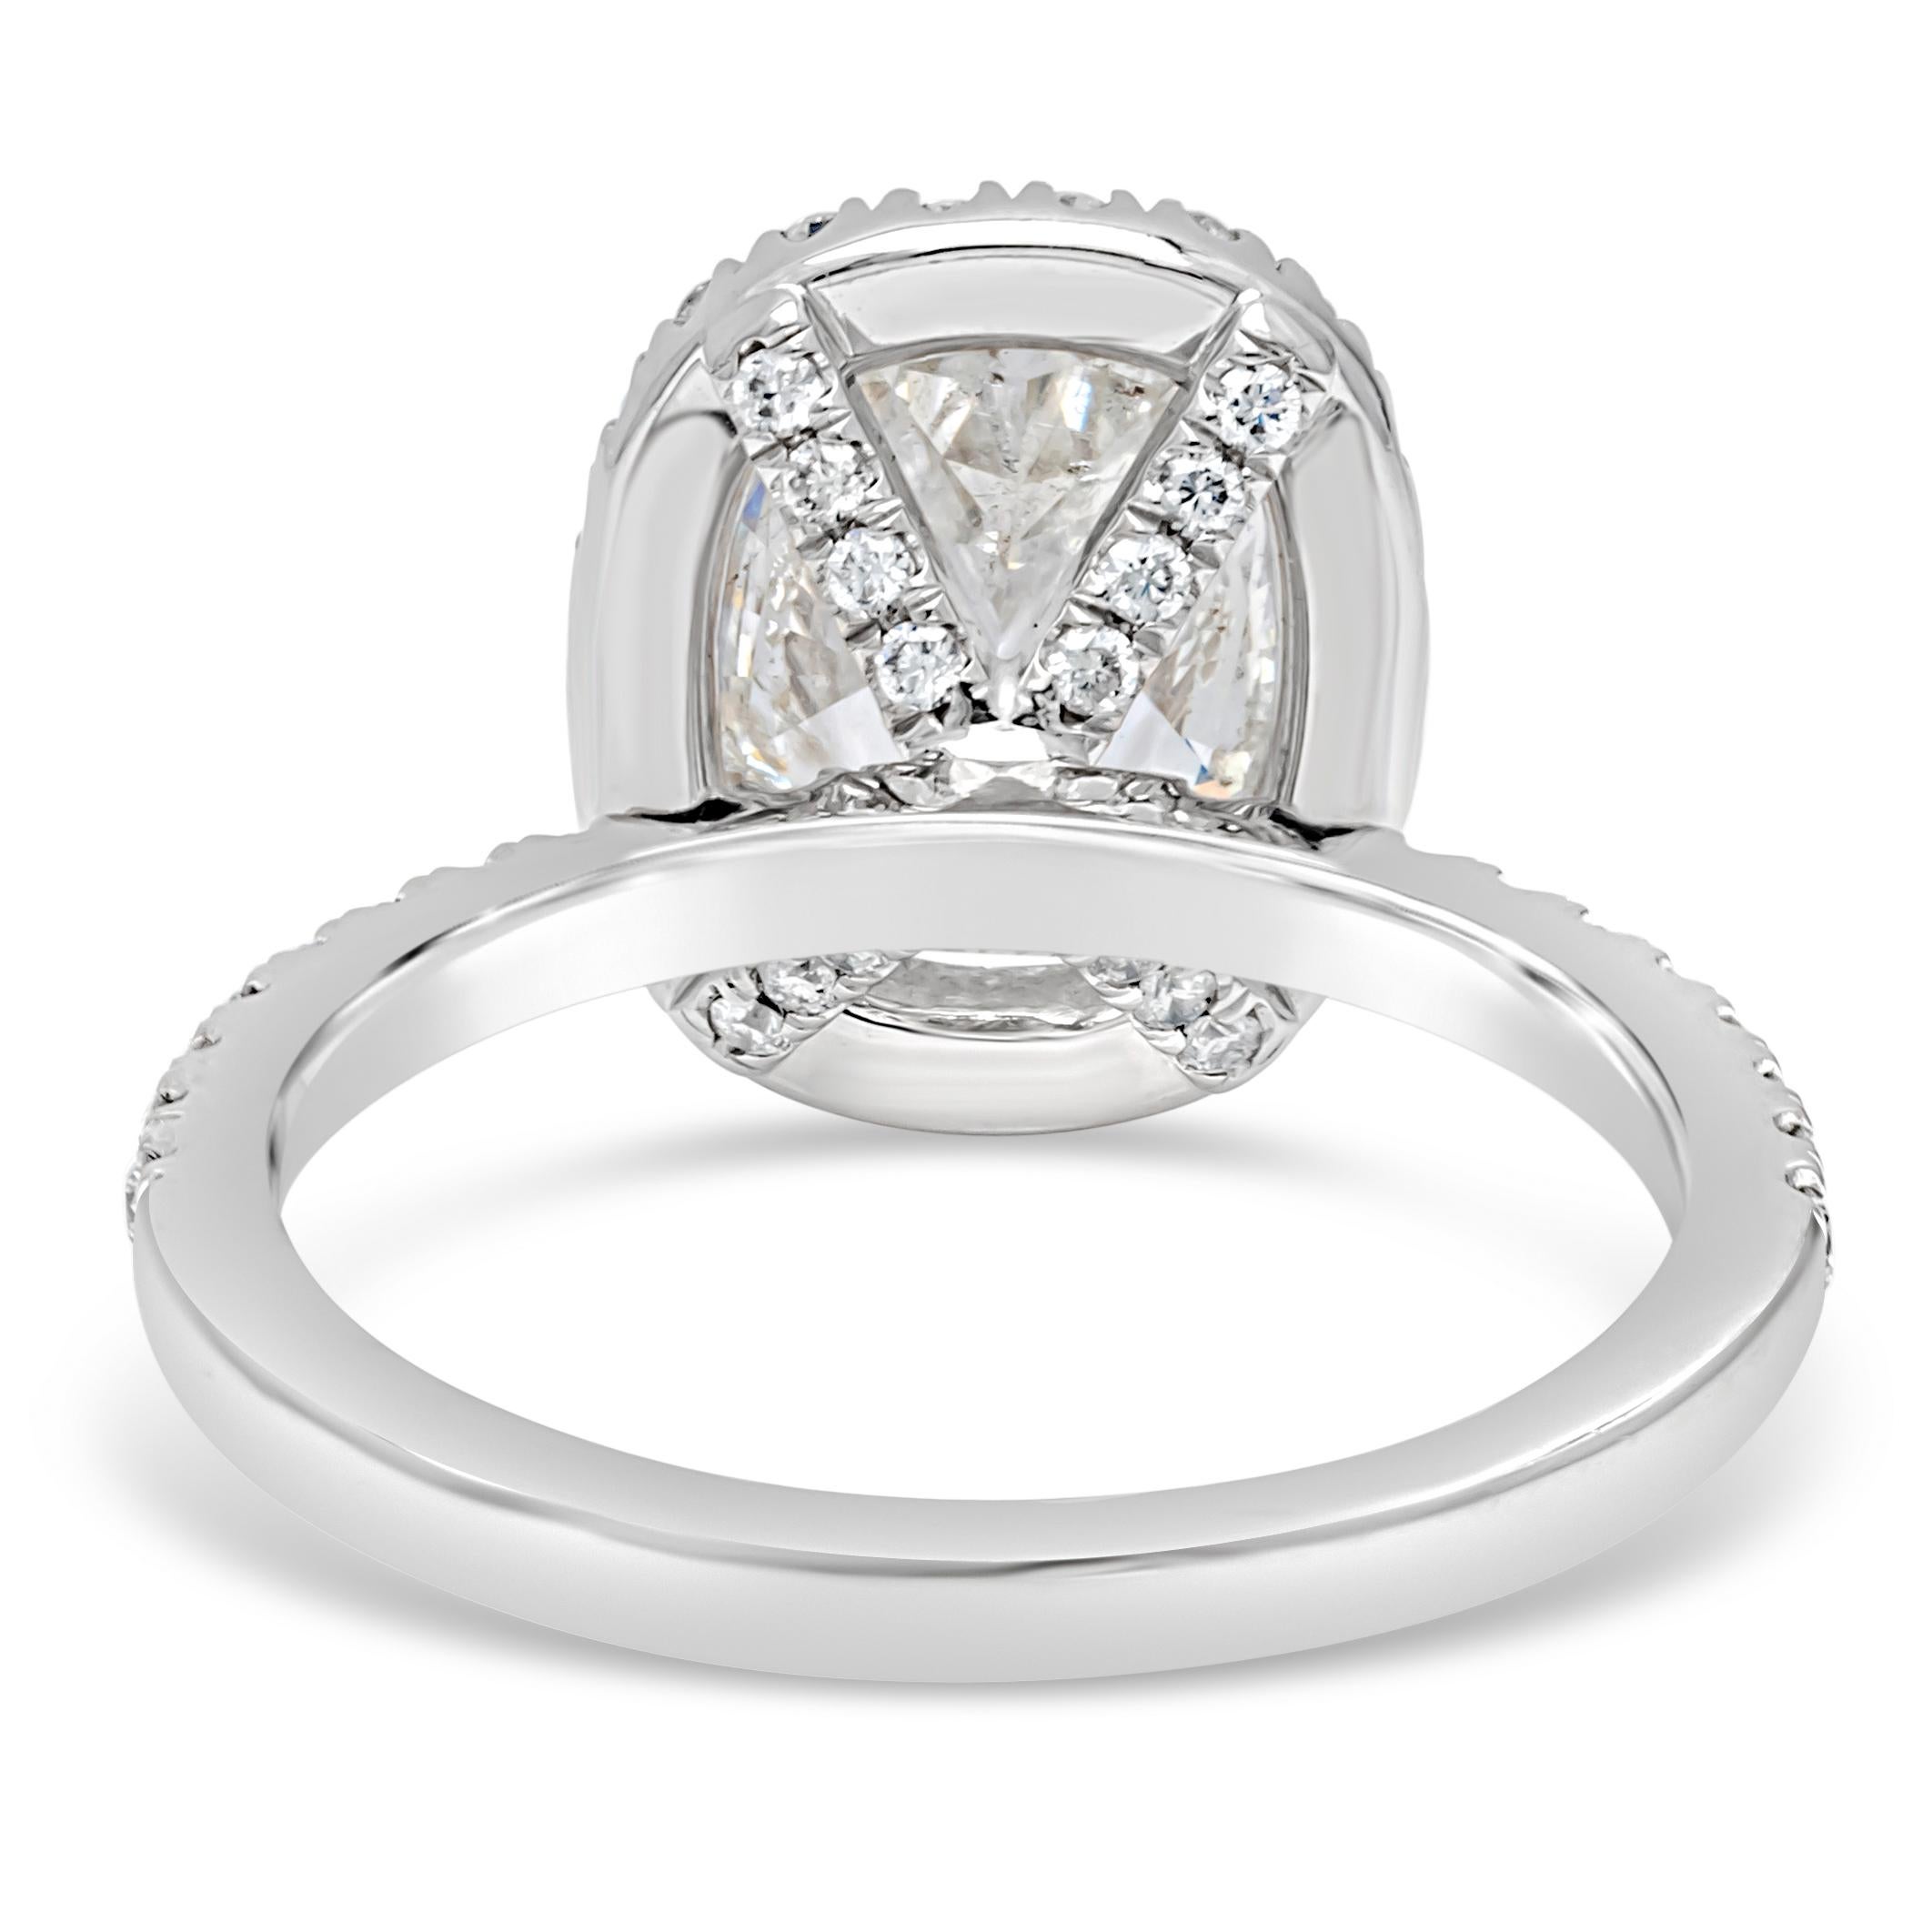 Roman Malakov 2.07 Carat Elongated Cushion Cut Diamond Halo Pave Engagement Ring In New Condition For Sale In New York, NY